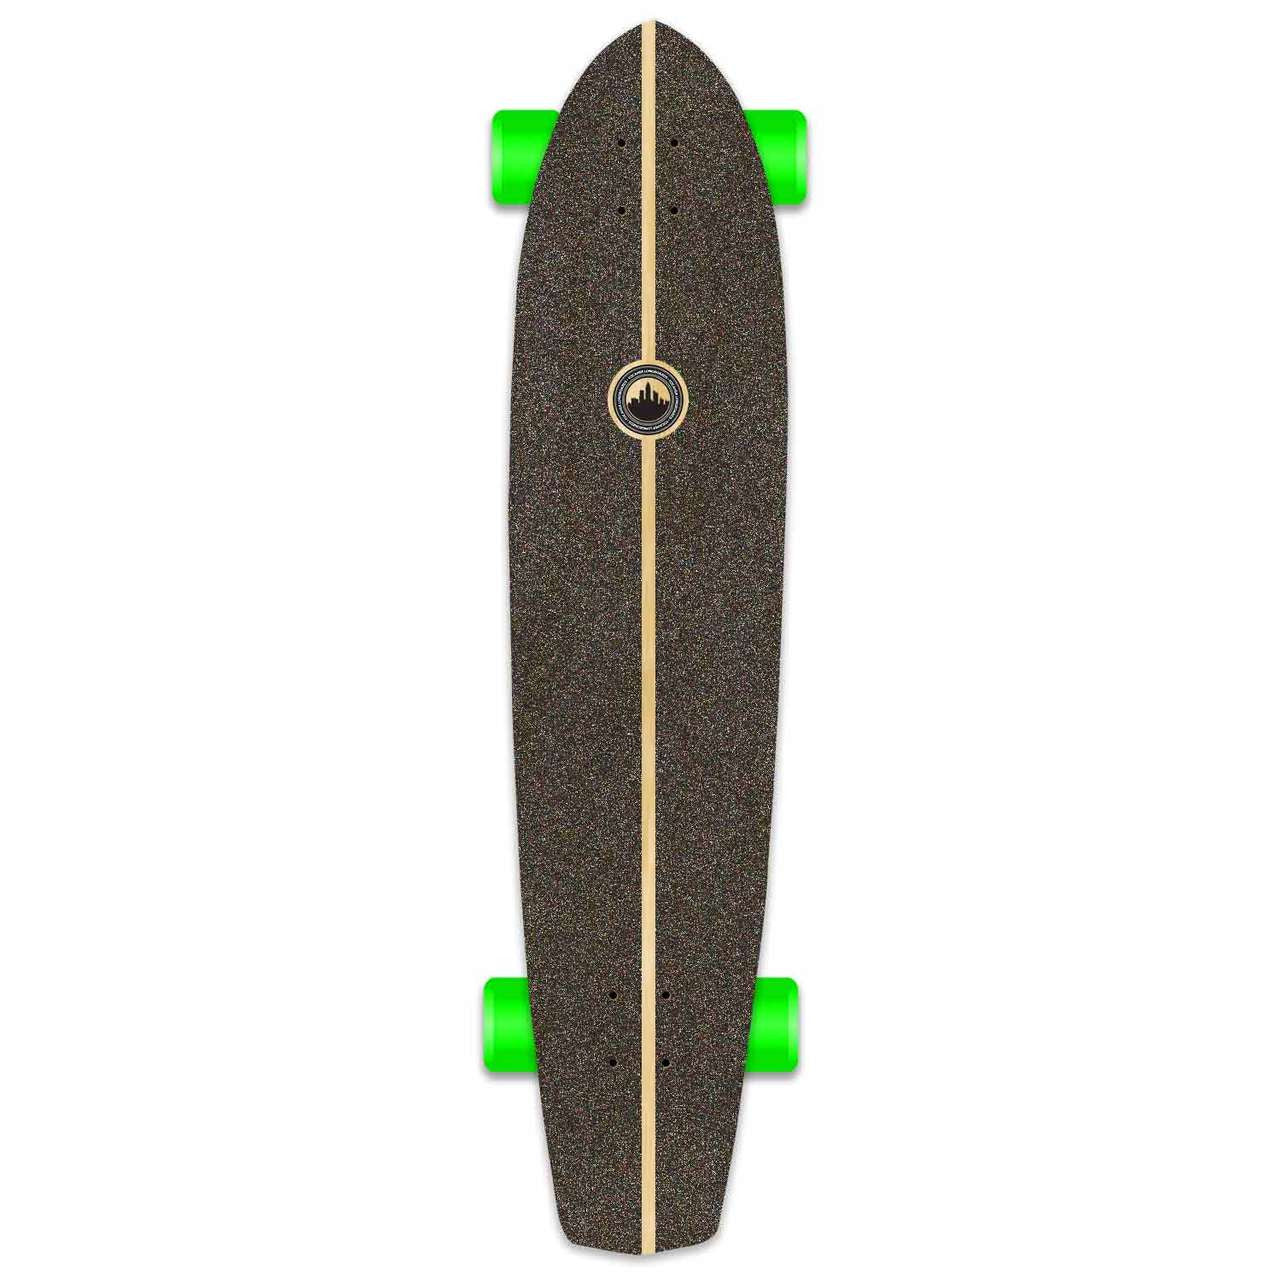 Yocaher Slimkick Longboard Complete - Stained Purple